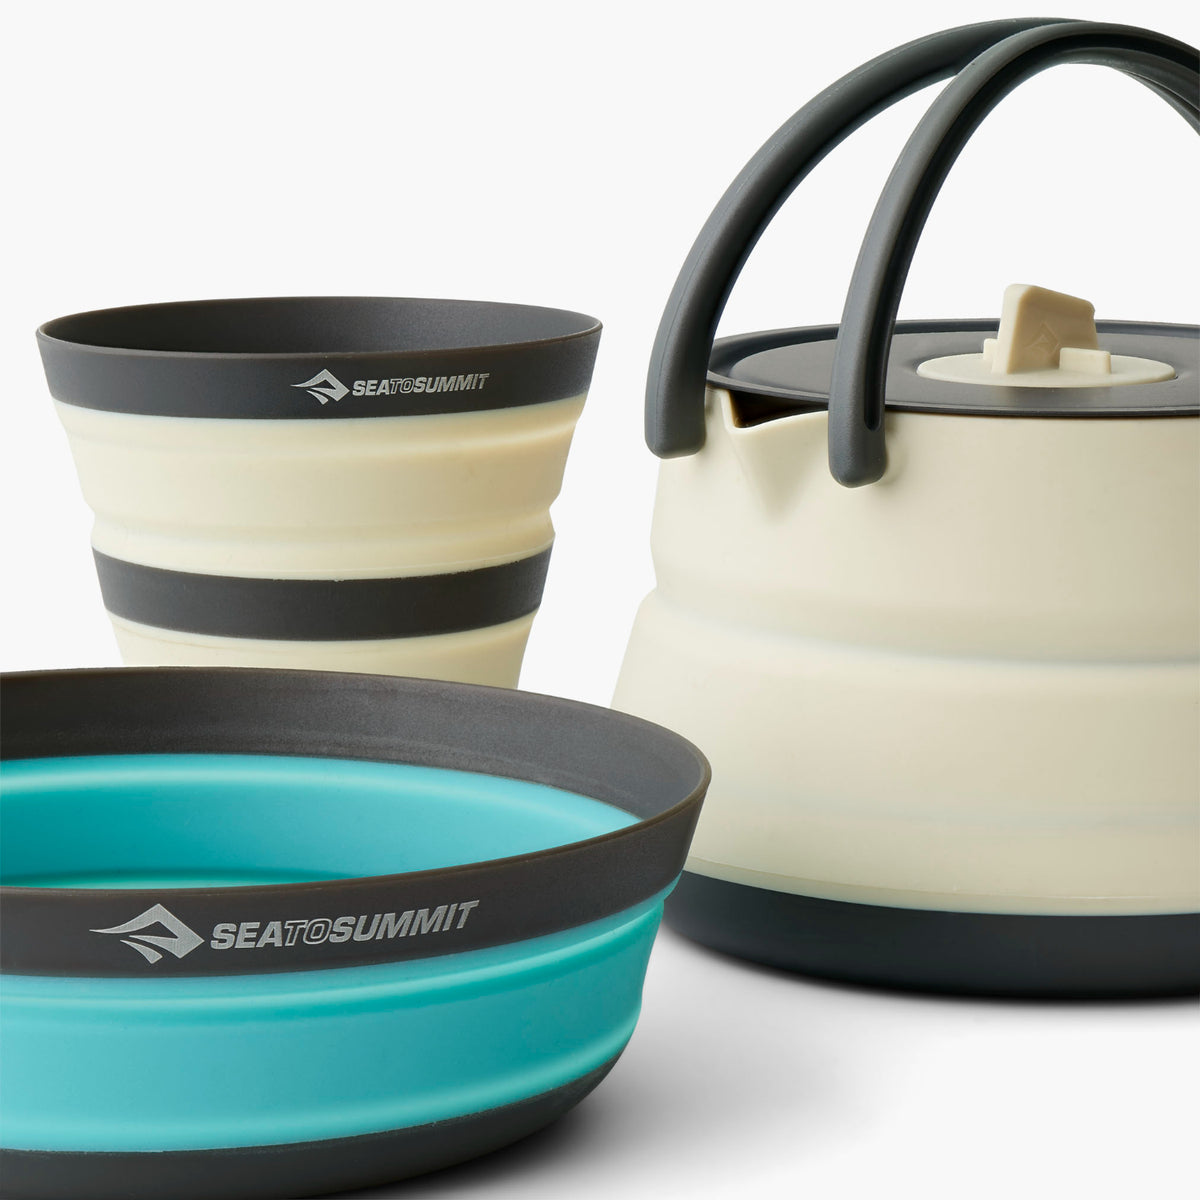 Sea to Summit Frontier Ultralight Collapsible Kettle Cook Set (1 Person, 3 Piece)